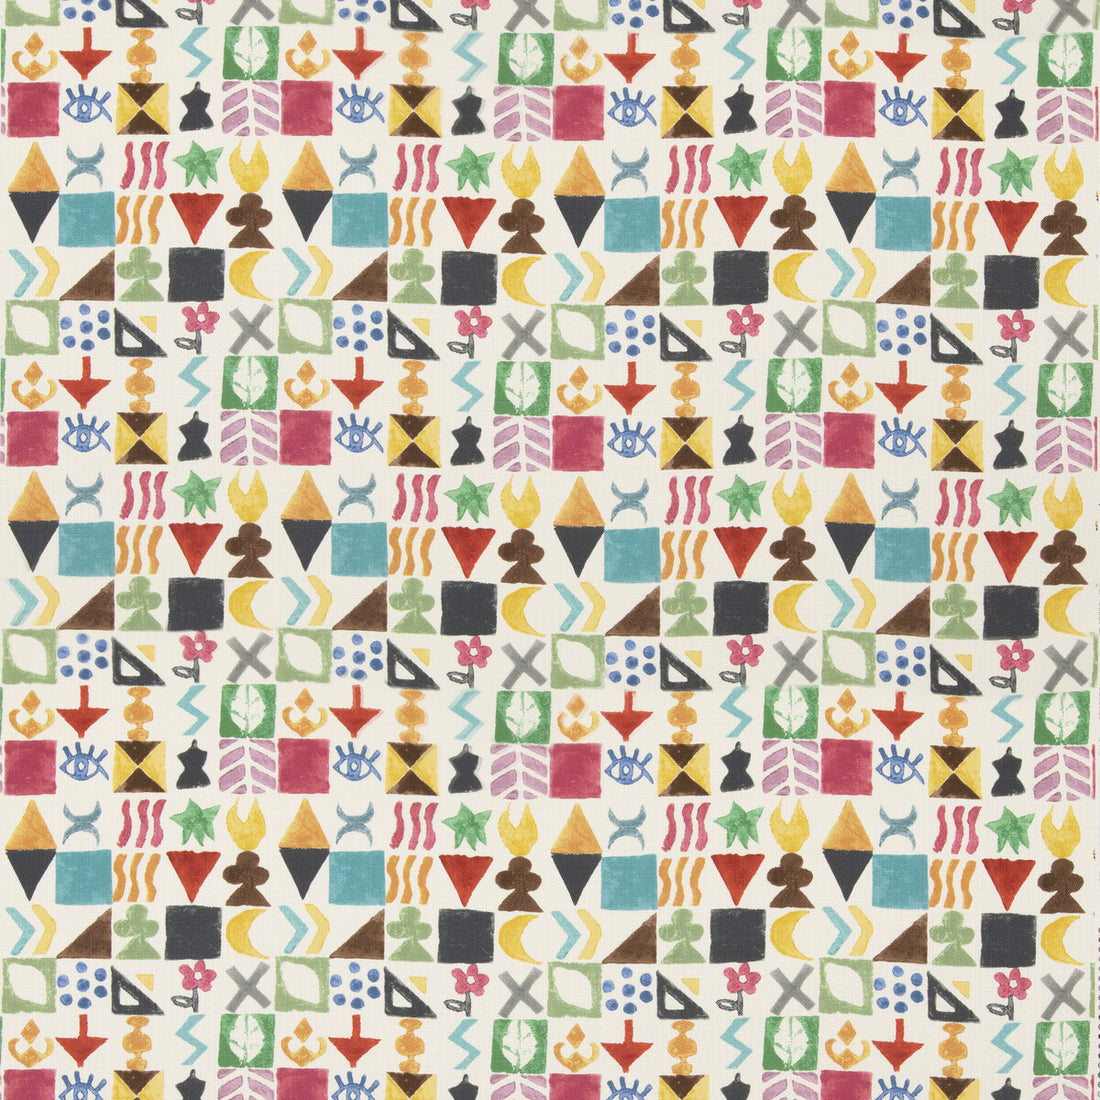 Potato Print fabric in jewel color - pattern BP11049.1.0 - by G P &amp; J Baker in the X Kit Kemp Prints And Embroideries collection